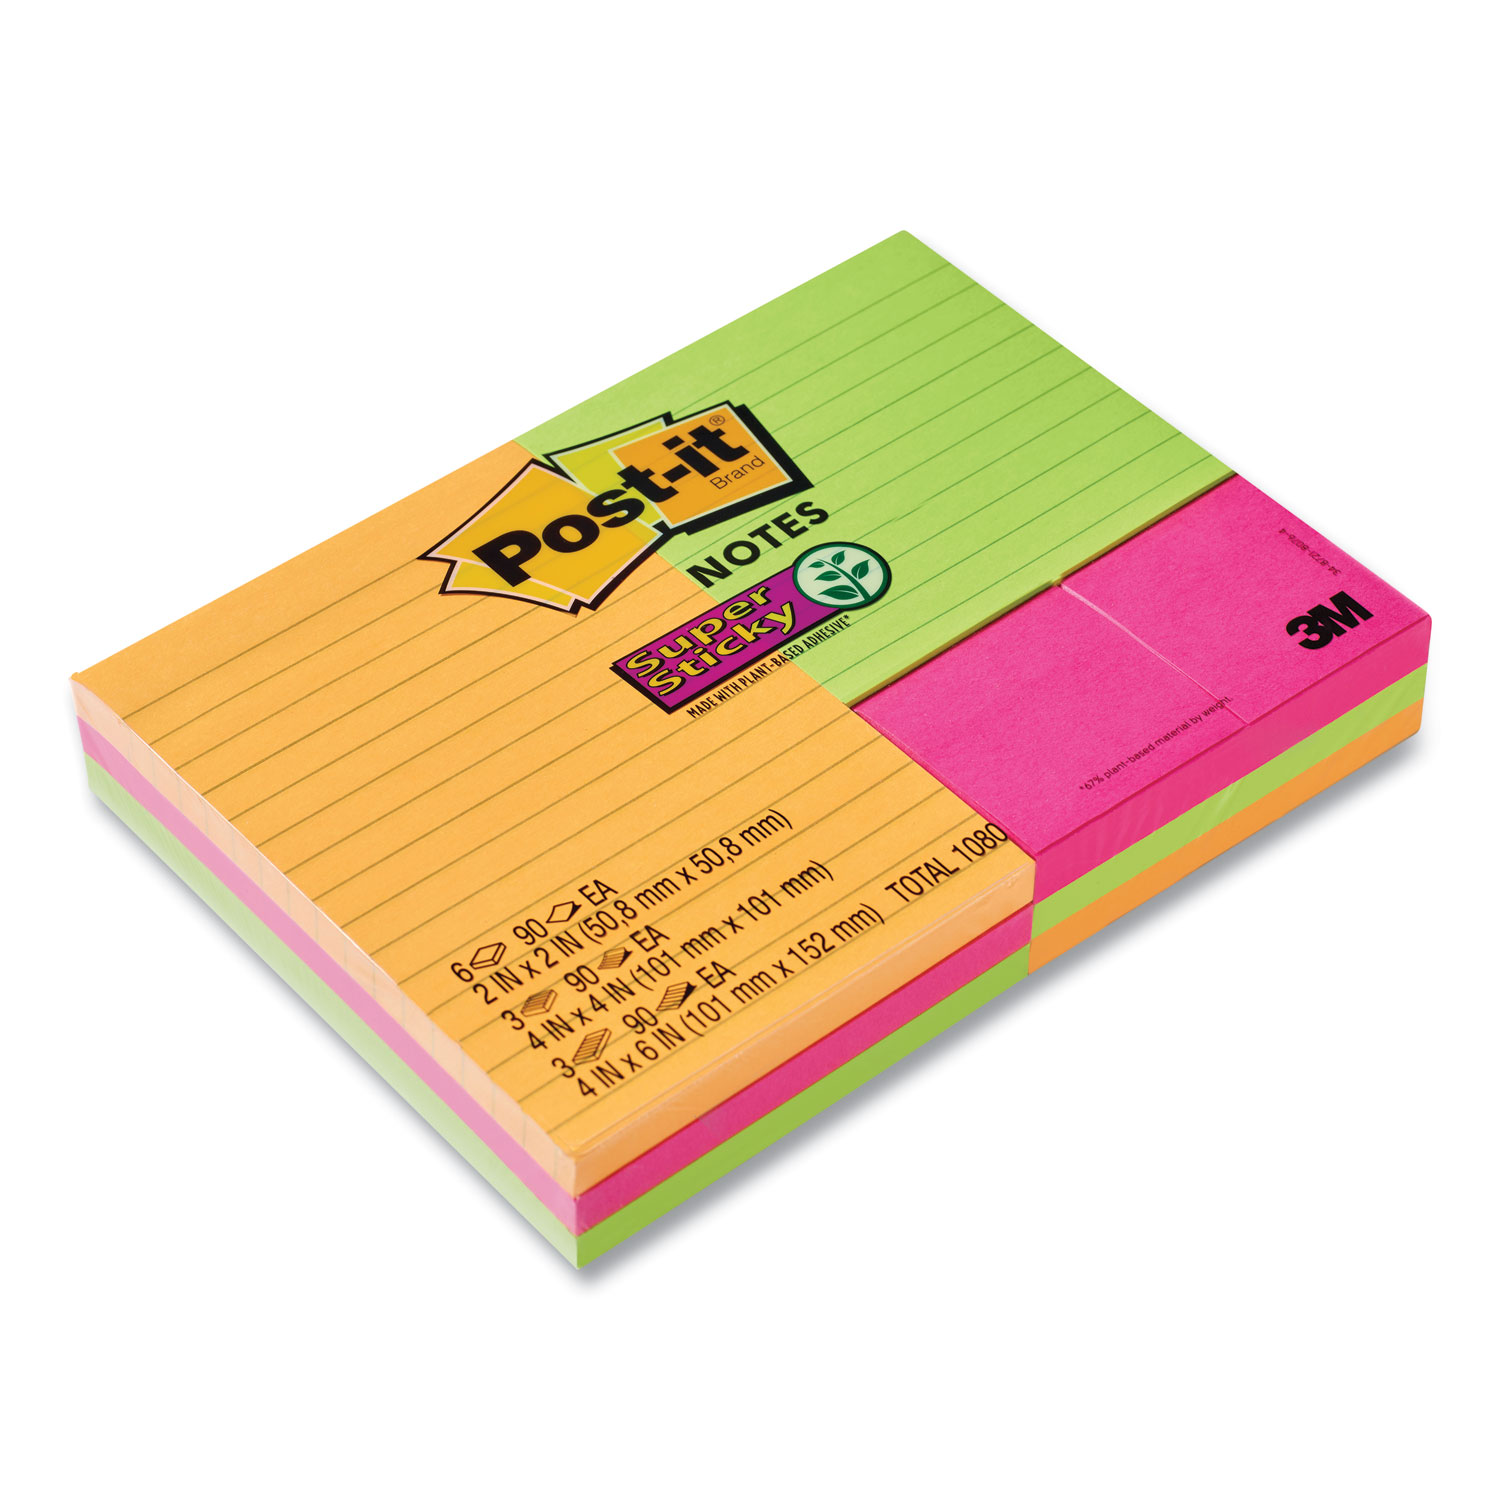 Post-it® Notes Super Sticky Pads in Rio de Janeiro Colors, Combo Pack, 6 Plain 1.88 x 1.88, 3 Lined 4 x 4, 3 Lined 4 x 6, 90 Sheets/Pad, 12 Pads/Pack